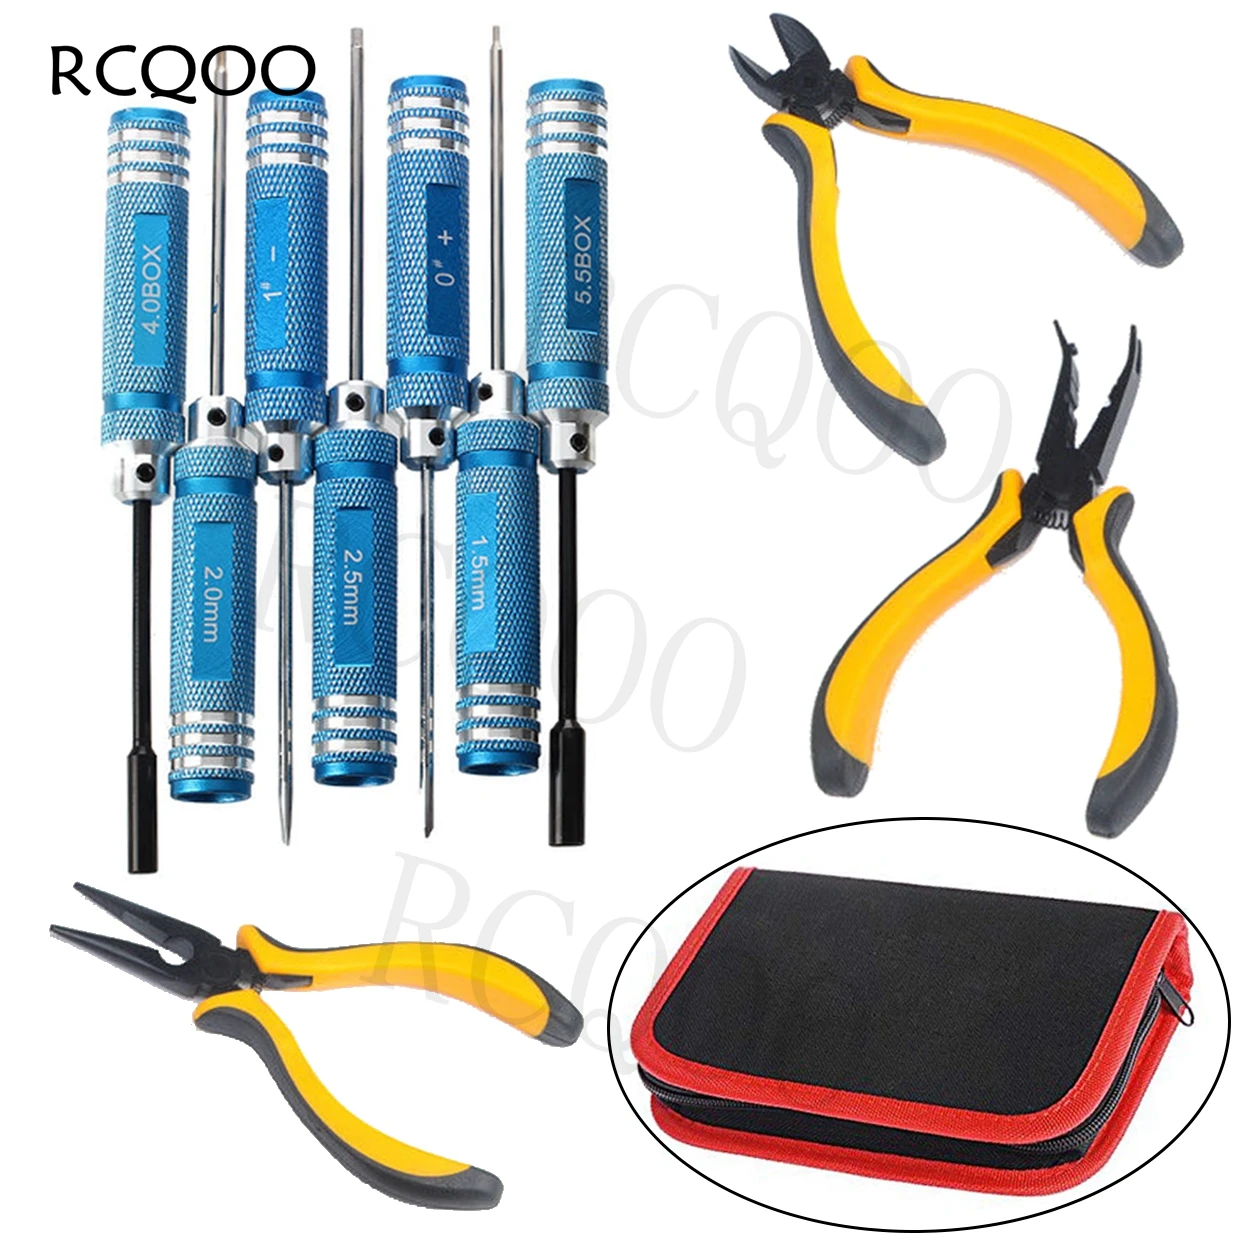 A 10 in 1 Screwdriver and Pliers Tool Kit for Helicopter Airplane,RC Model Car 